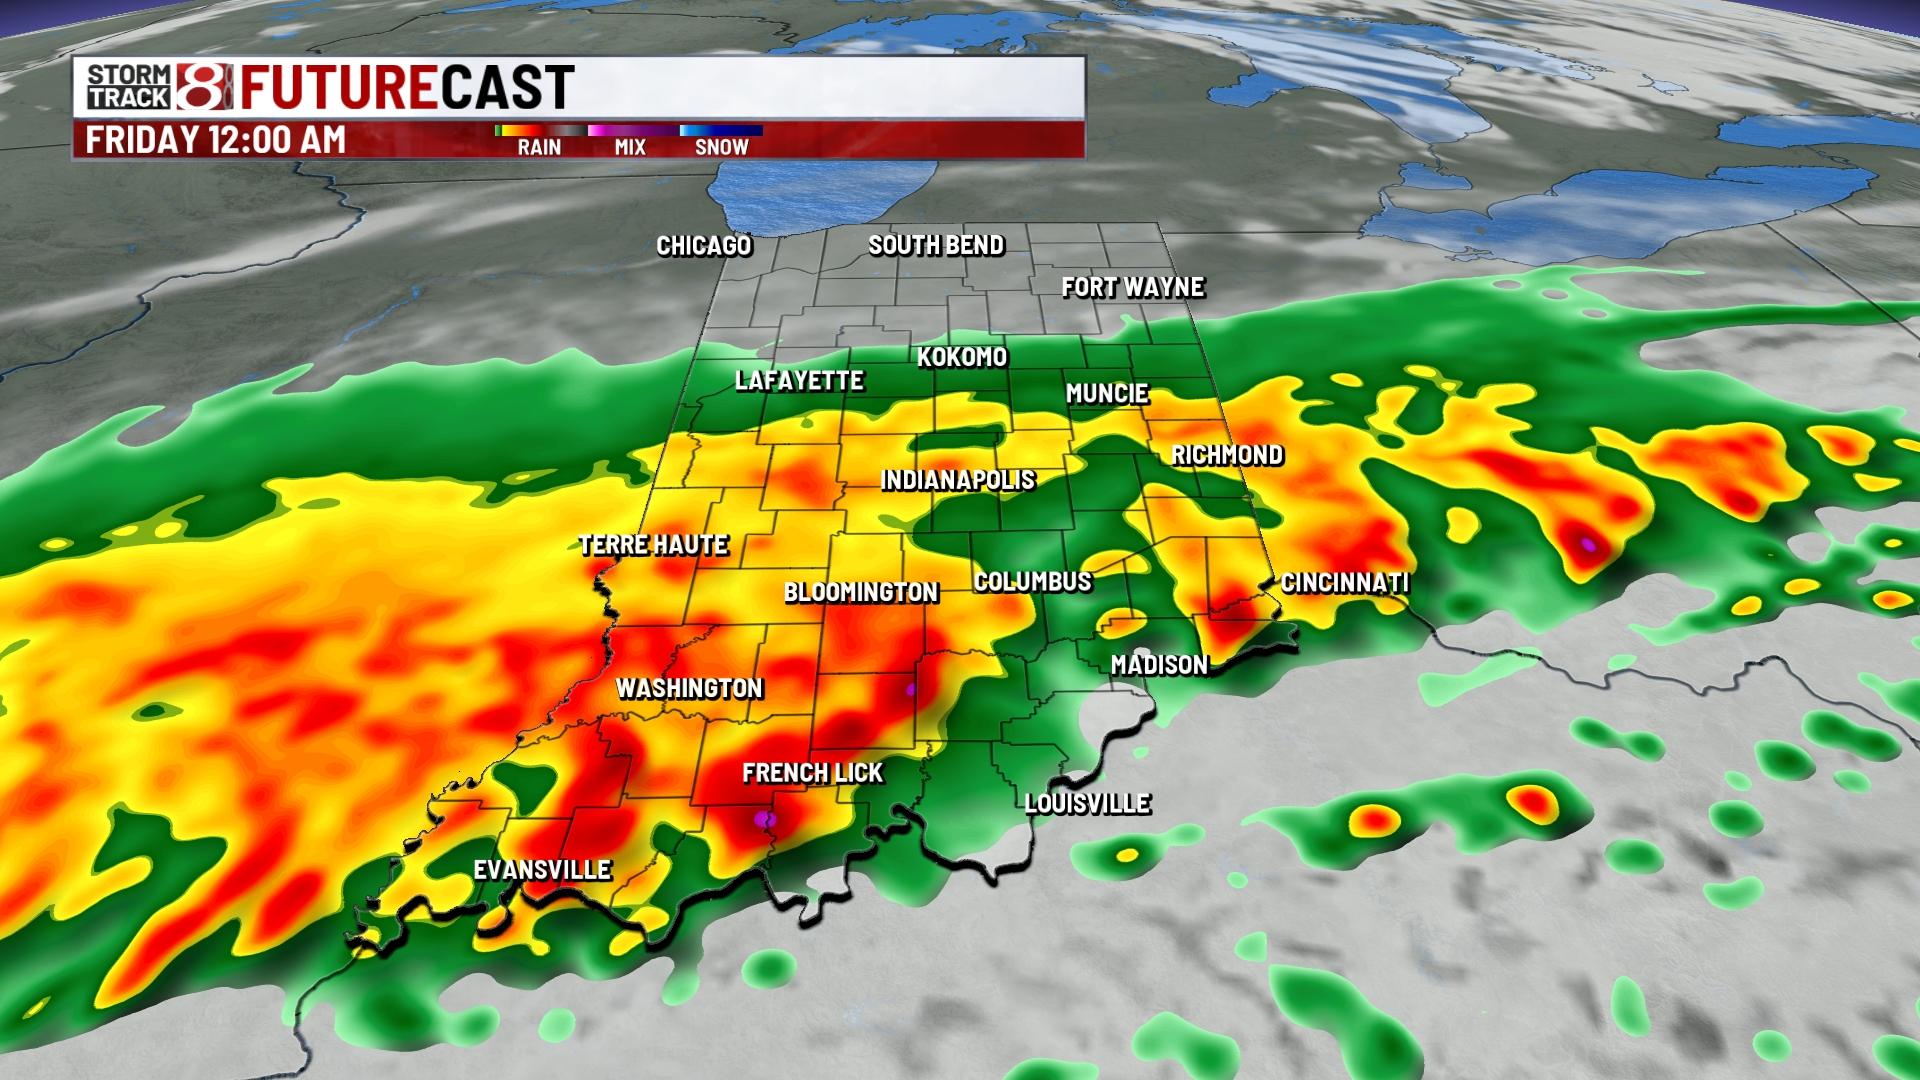 Rainy end to the week with flooding concerns